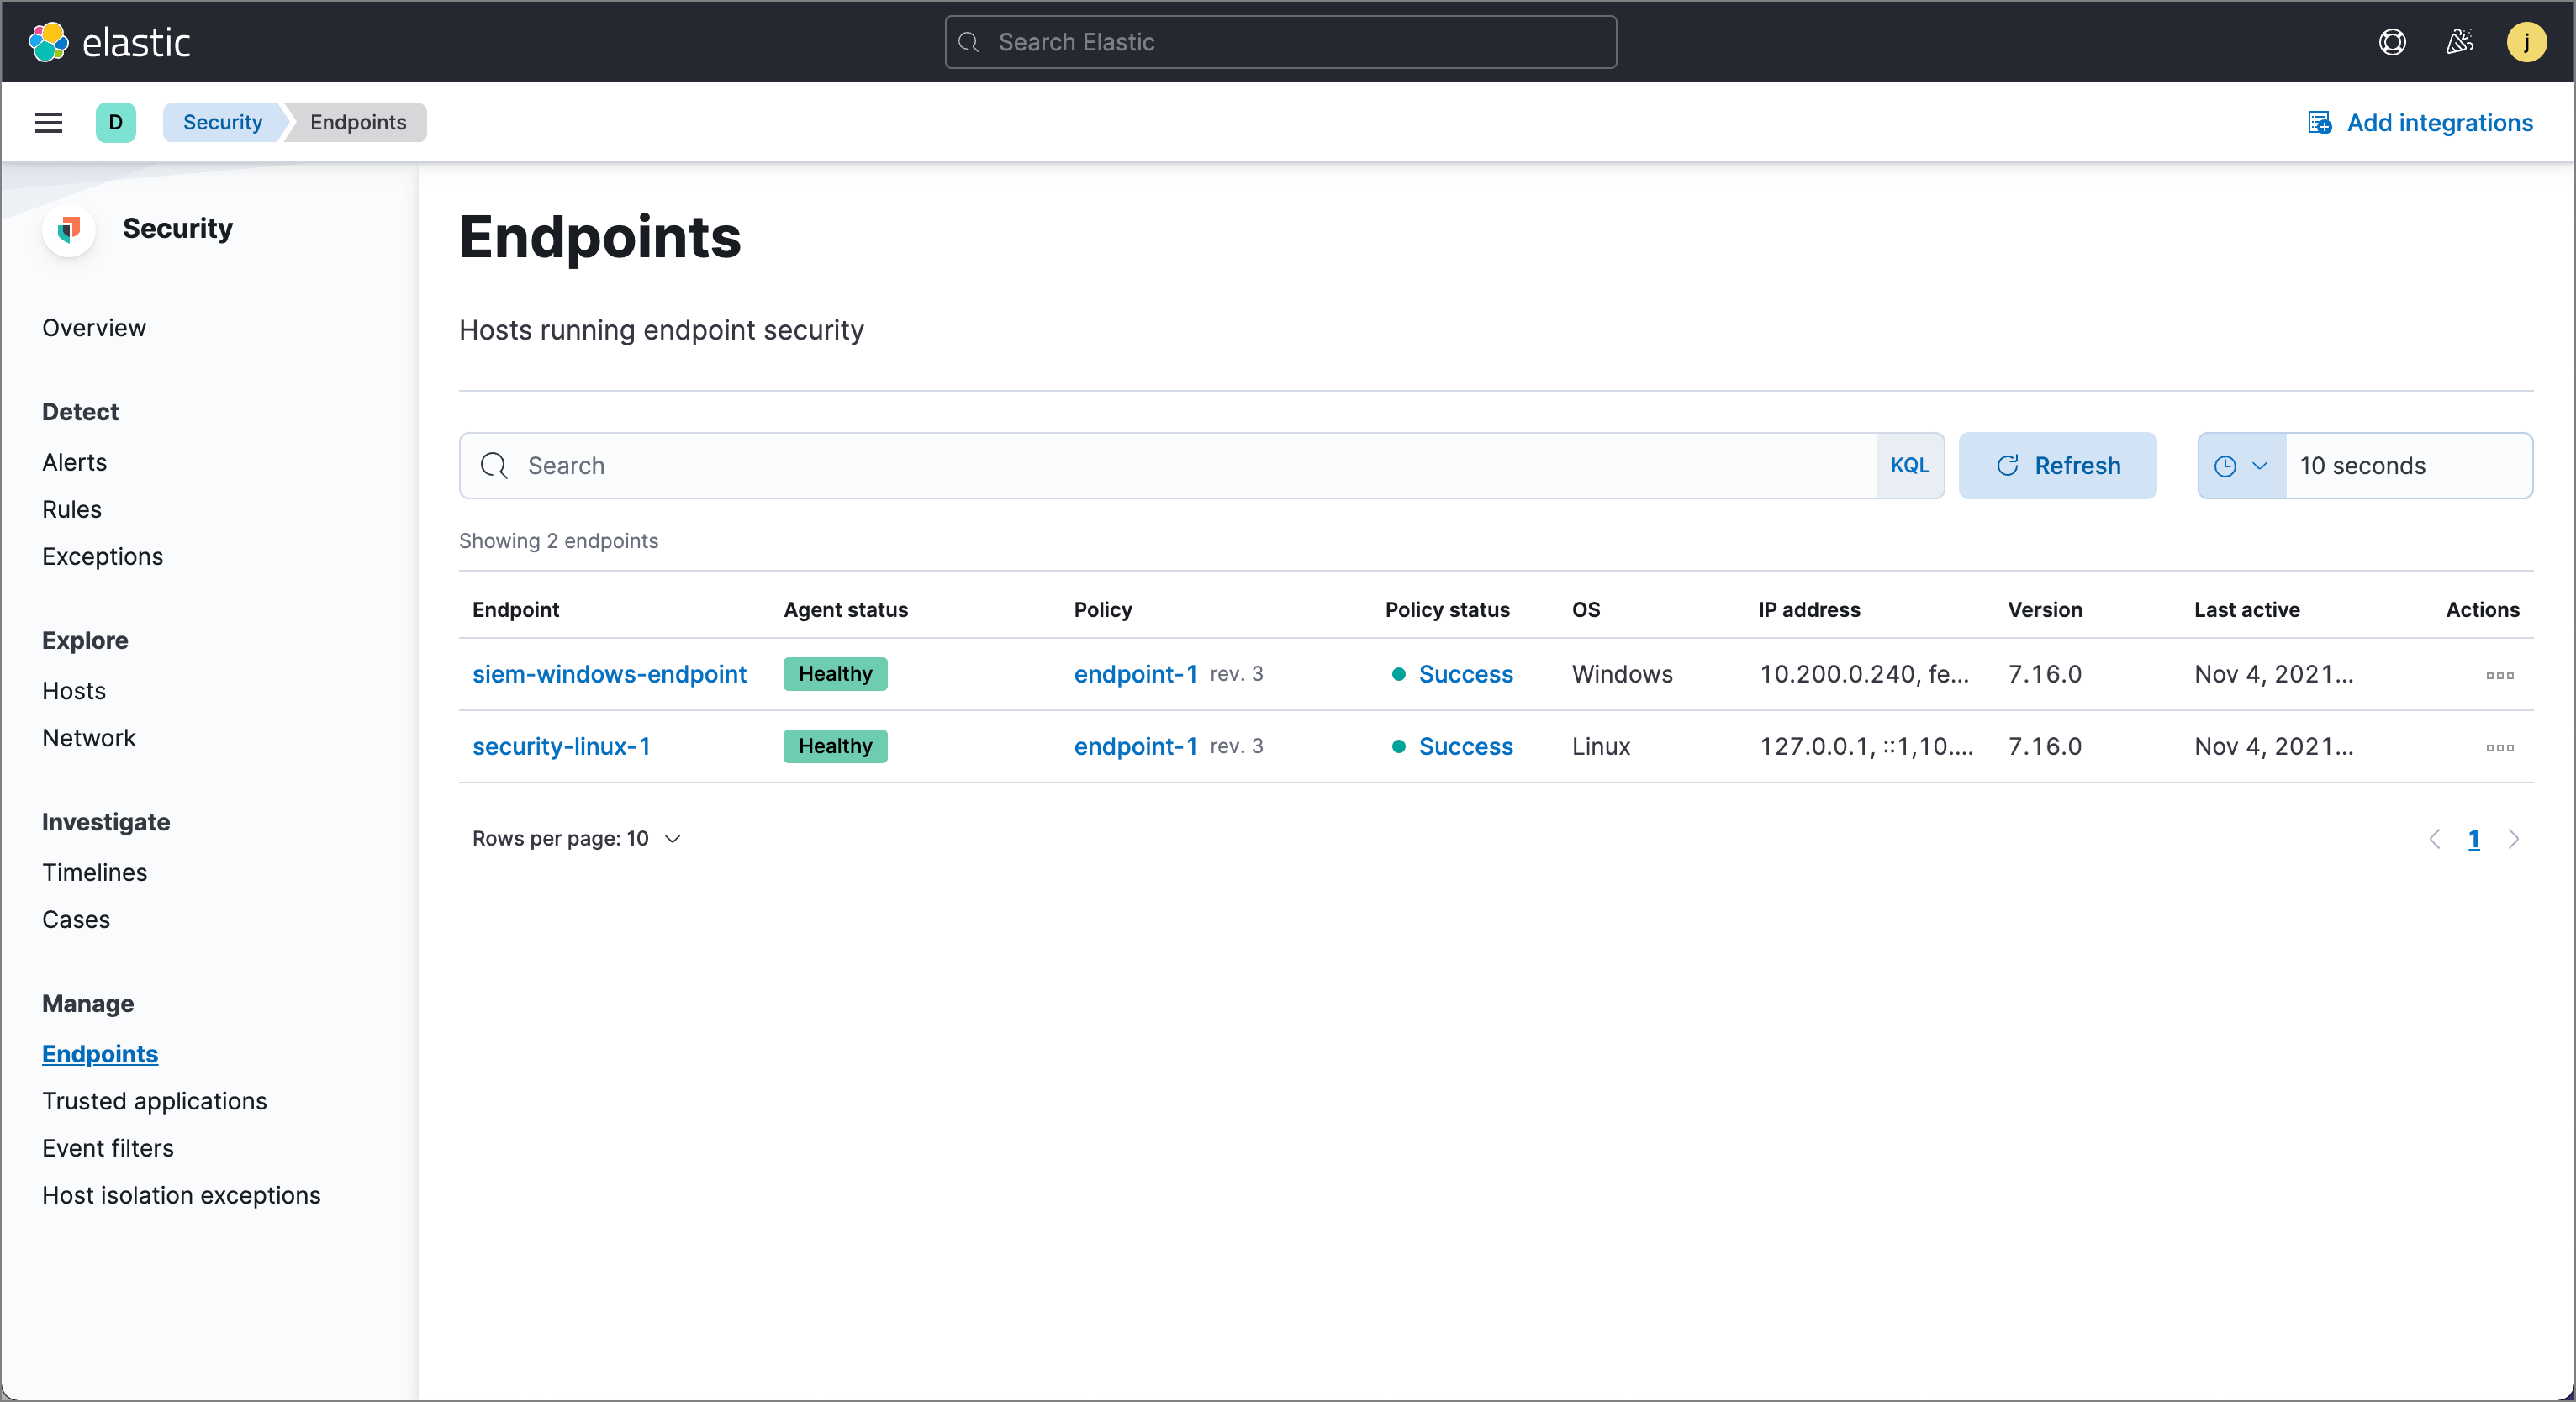 Shows the Endpoints page